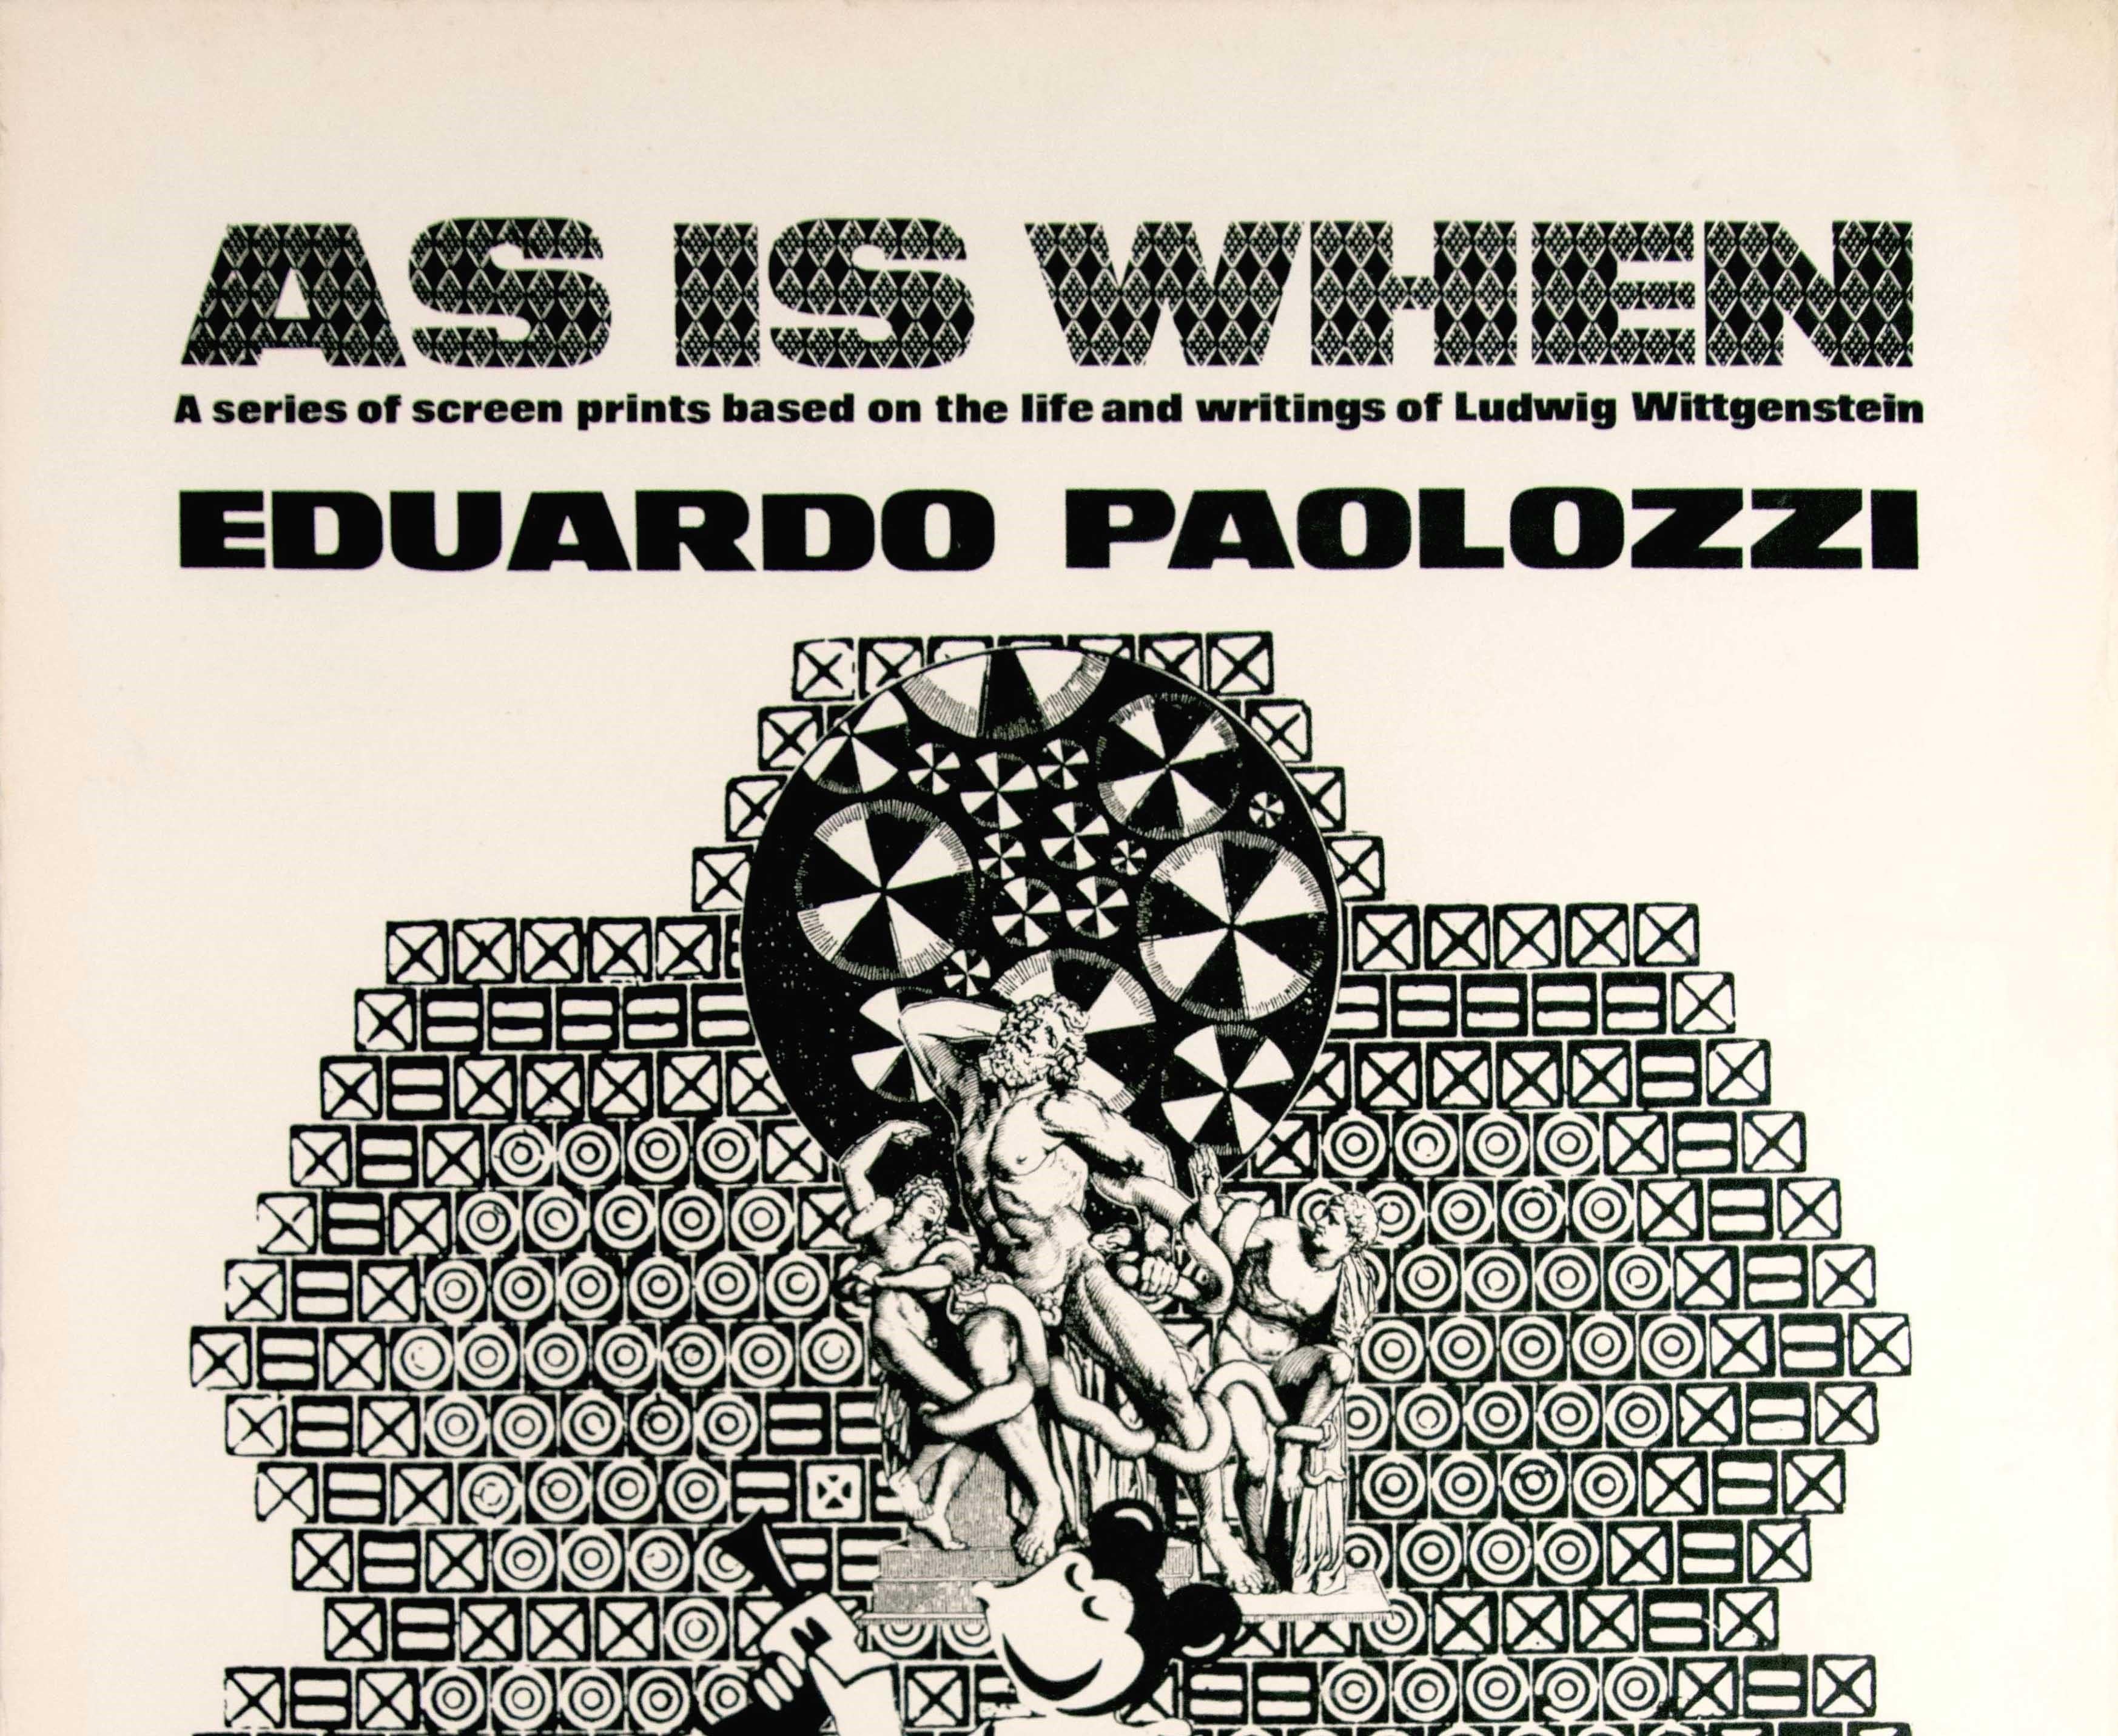 Original vintage advertising poster for an exhibition of work by Eduardo Paolozzi - As Is When a series of screen prints based on the life and writings of Ludwig Wittgenstein - held by Editions Alecto London in May 1965 featuring a surreal design in